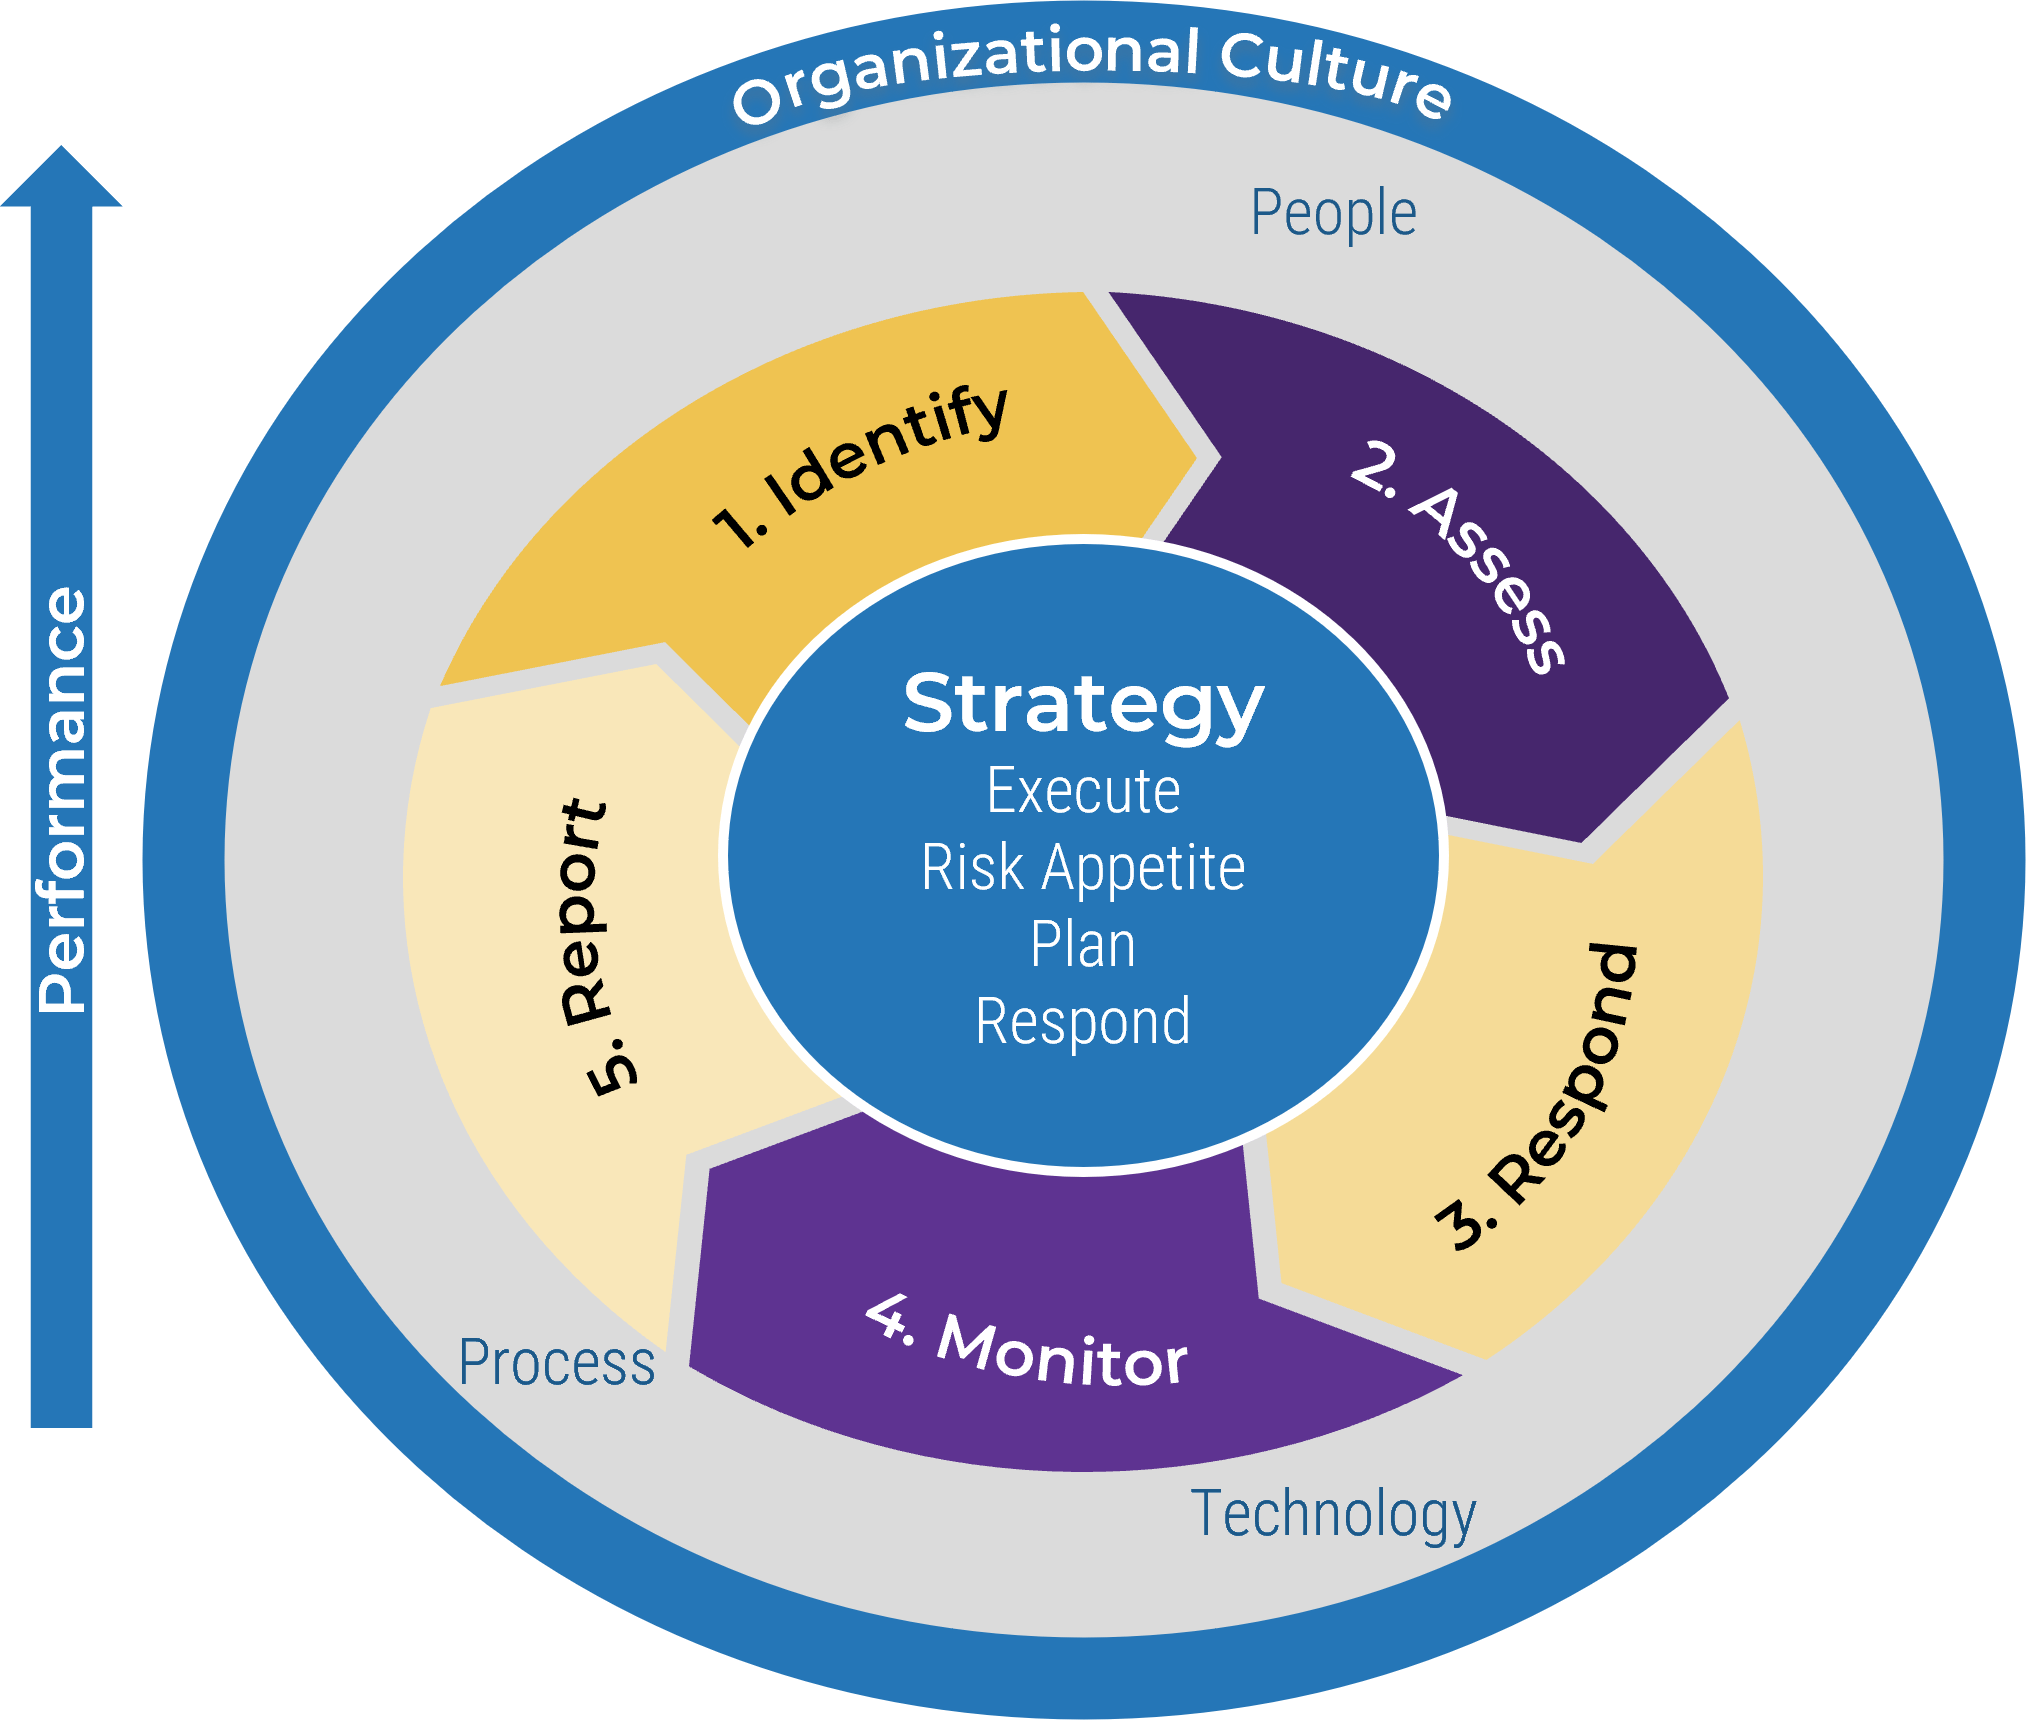 The image contains a screenshot that demonstrates how ERM is supported by strategy, effective processes, technology, and people.